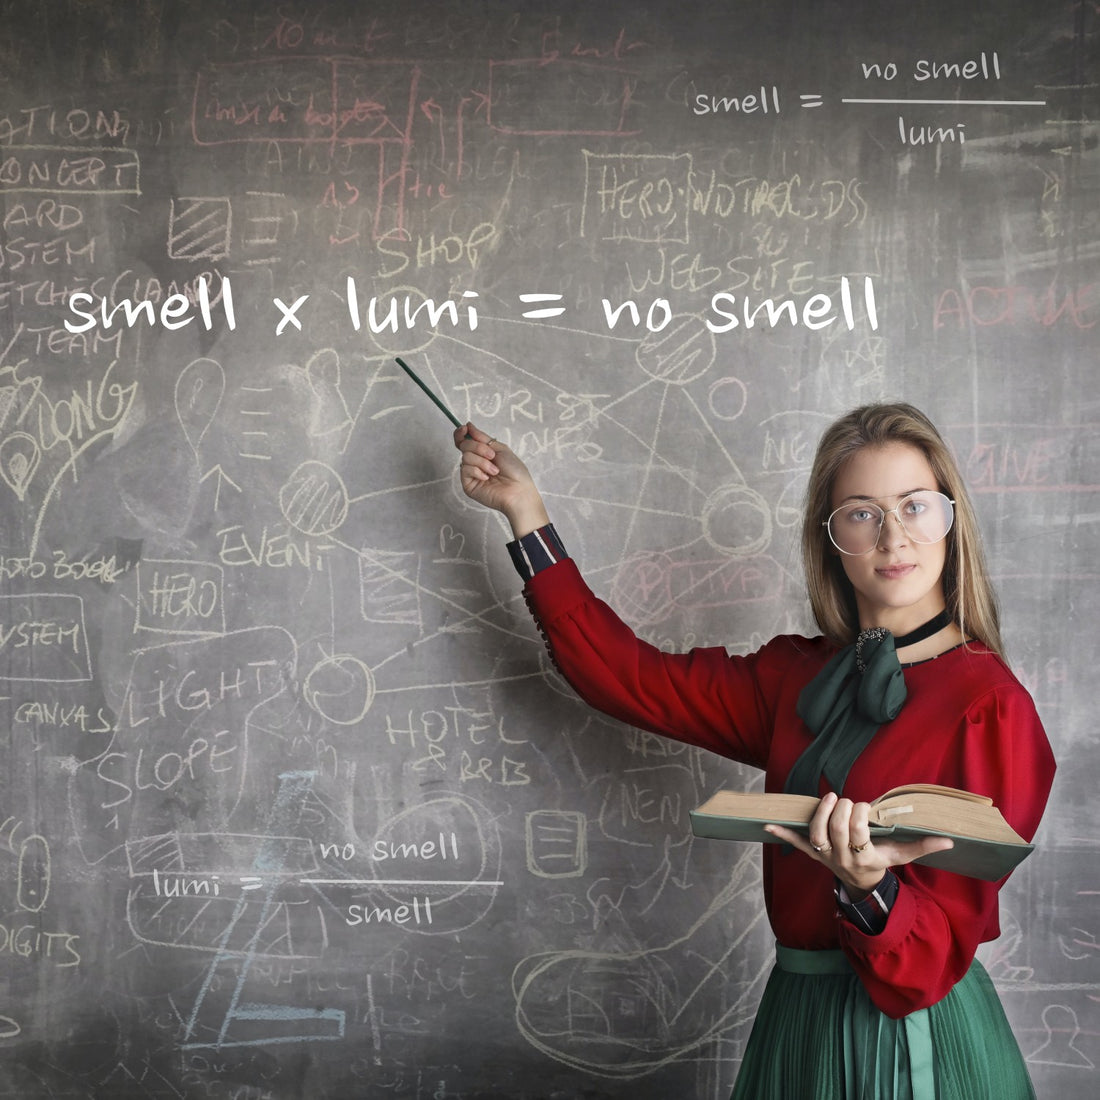 7 Things Smart People do to Prevent Shoe Smell